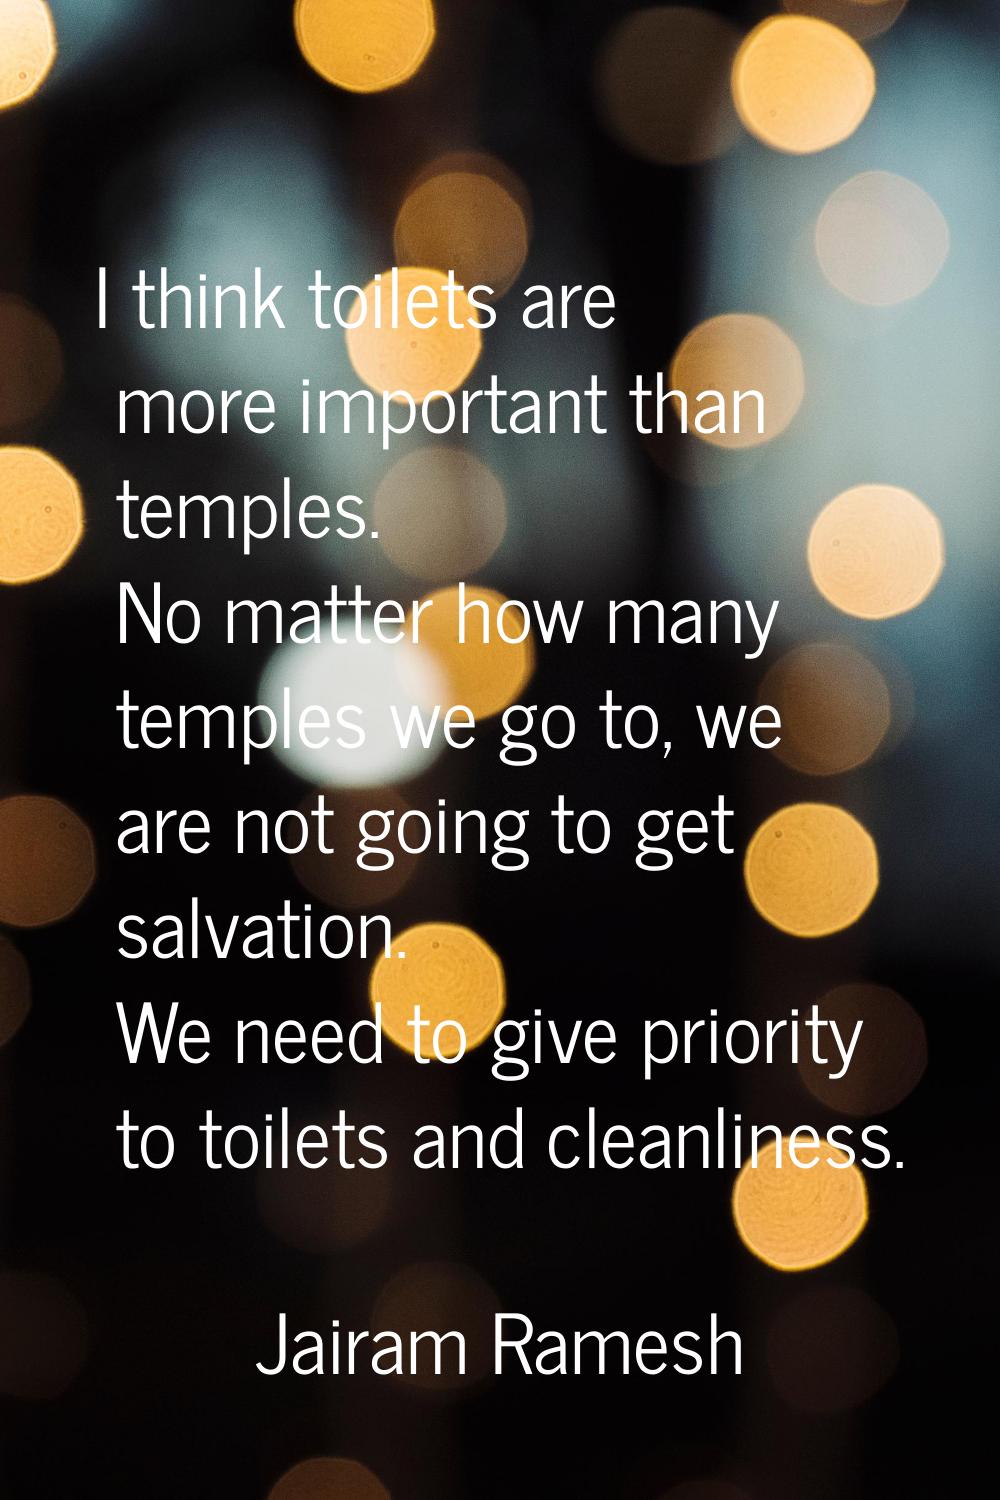 I think toilets are more important than temples. No matter how many temples we go to, we are not go